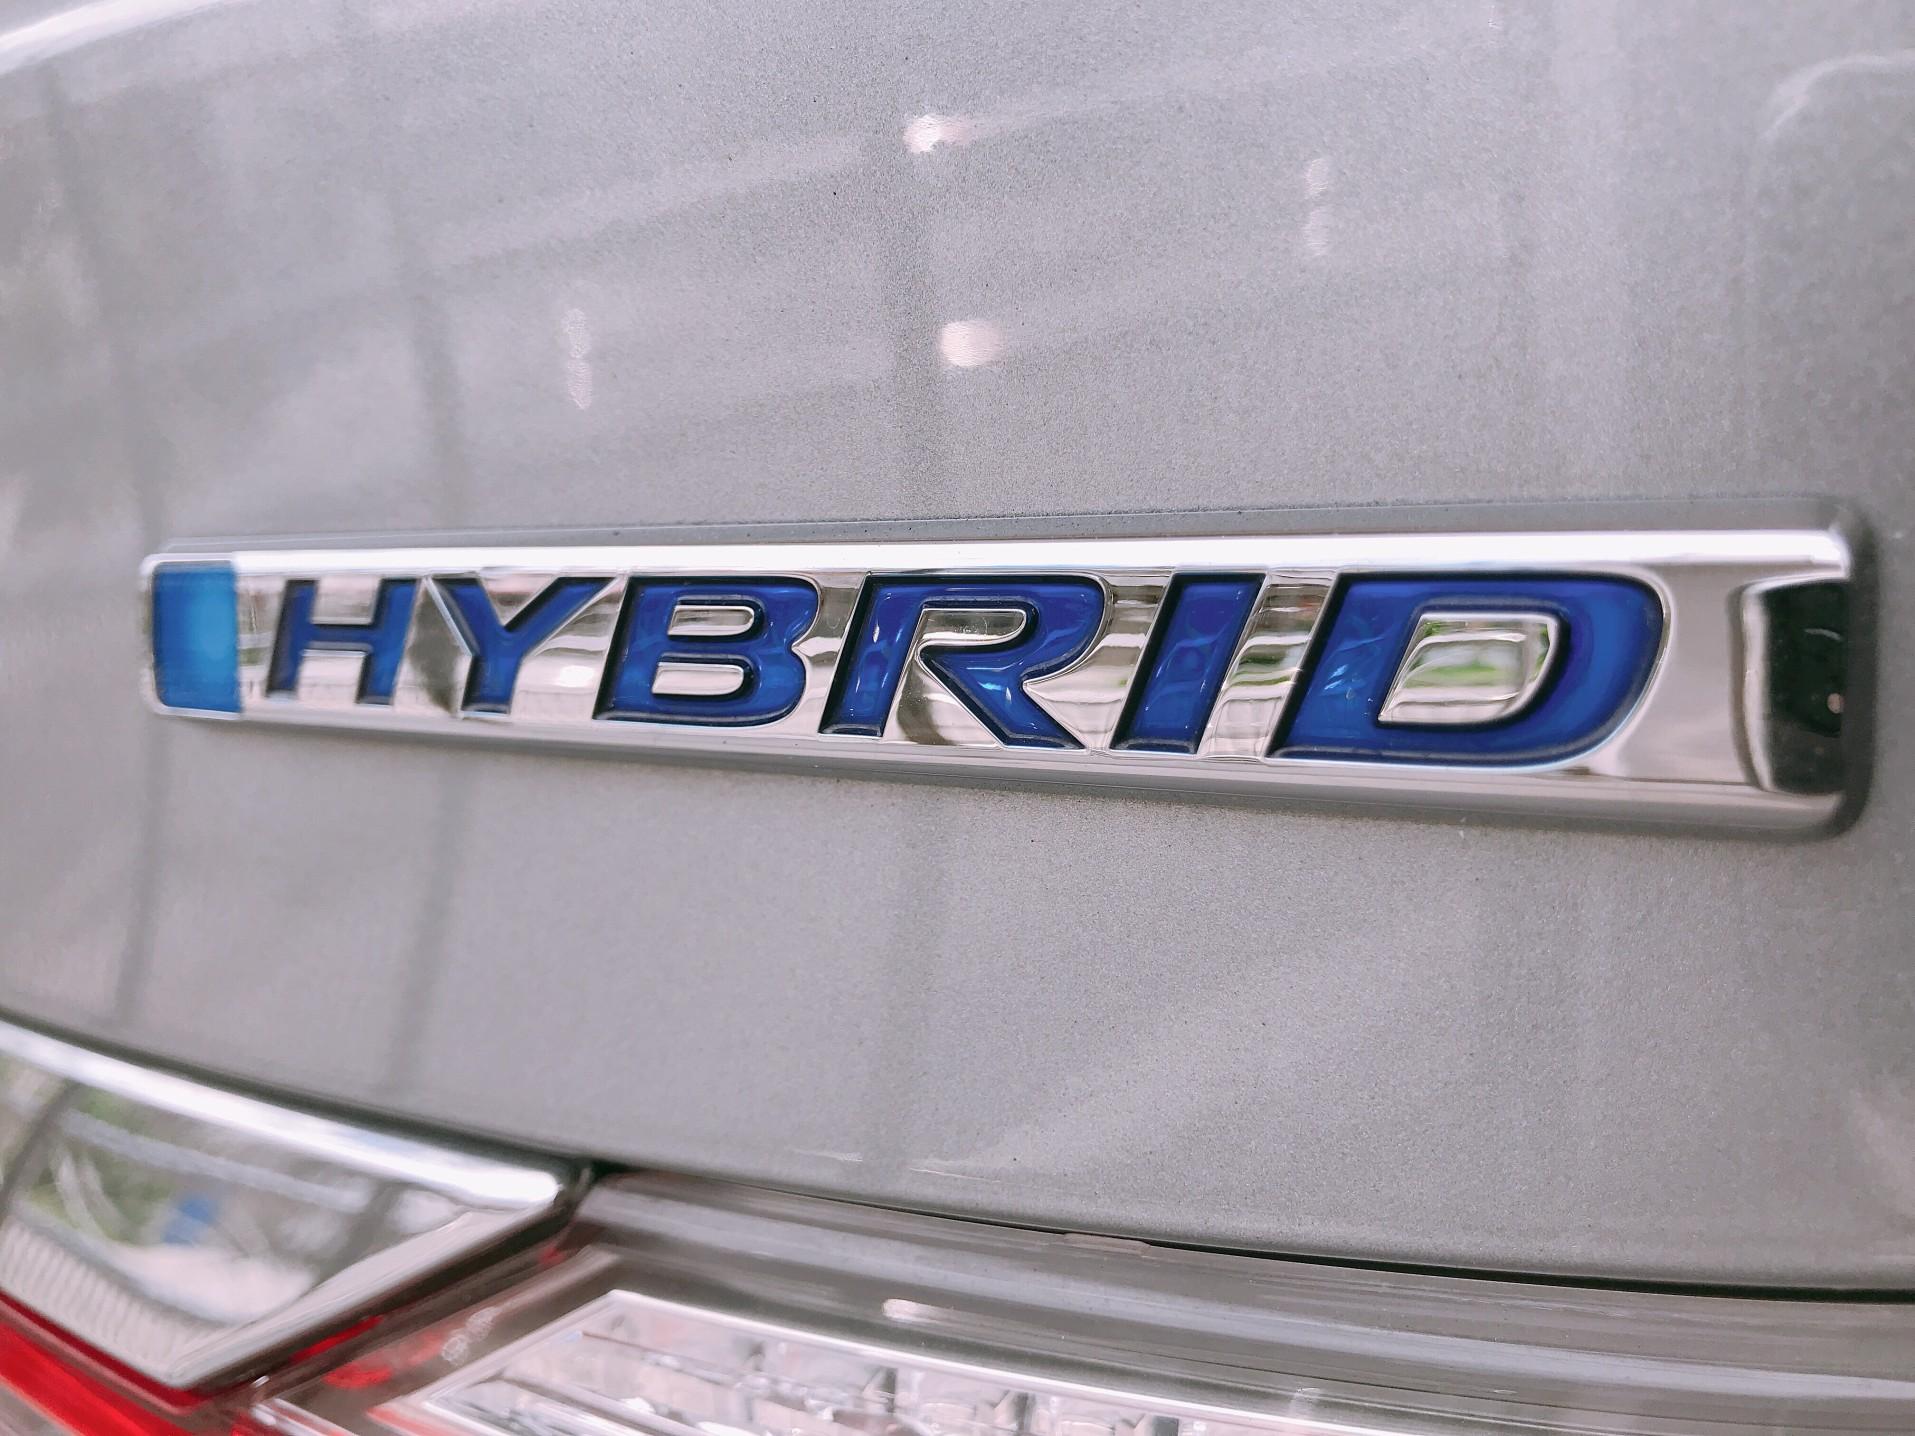 Do you know when the first hybrid car was developed?